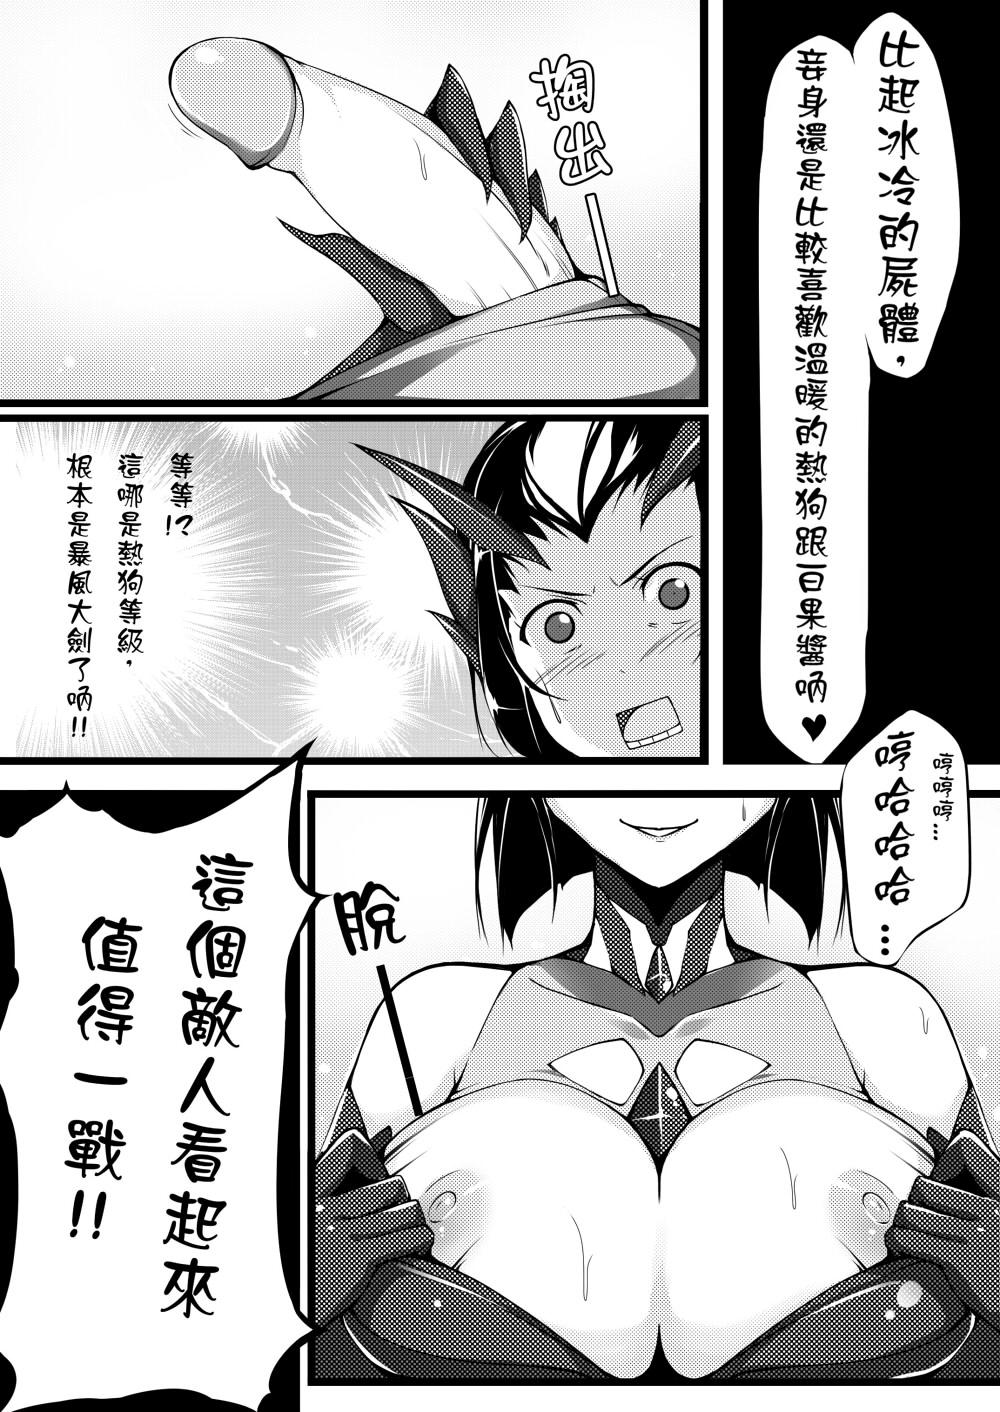 Blowing 蜘蛛王女-Darkness - League of legends Guys - Page 4